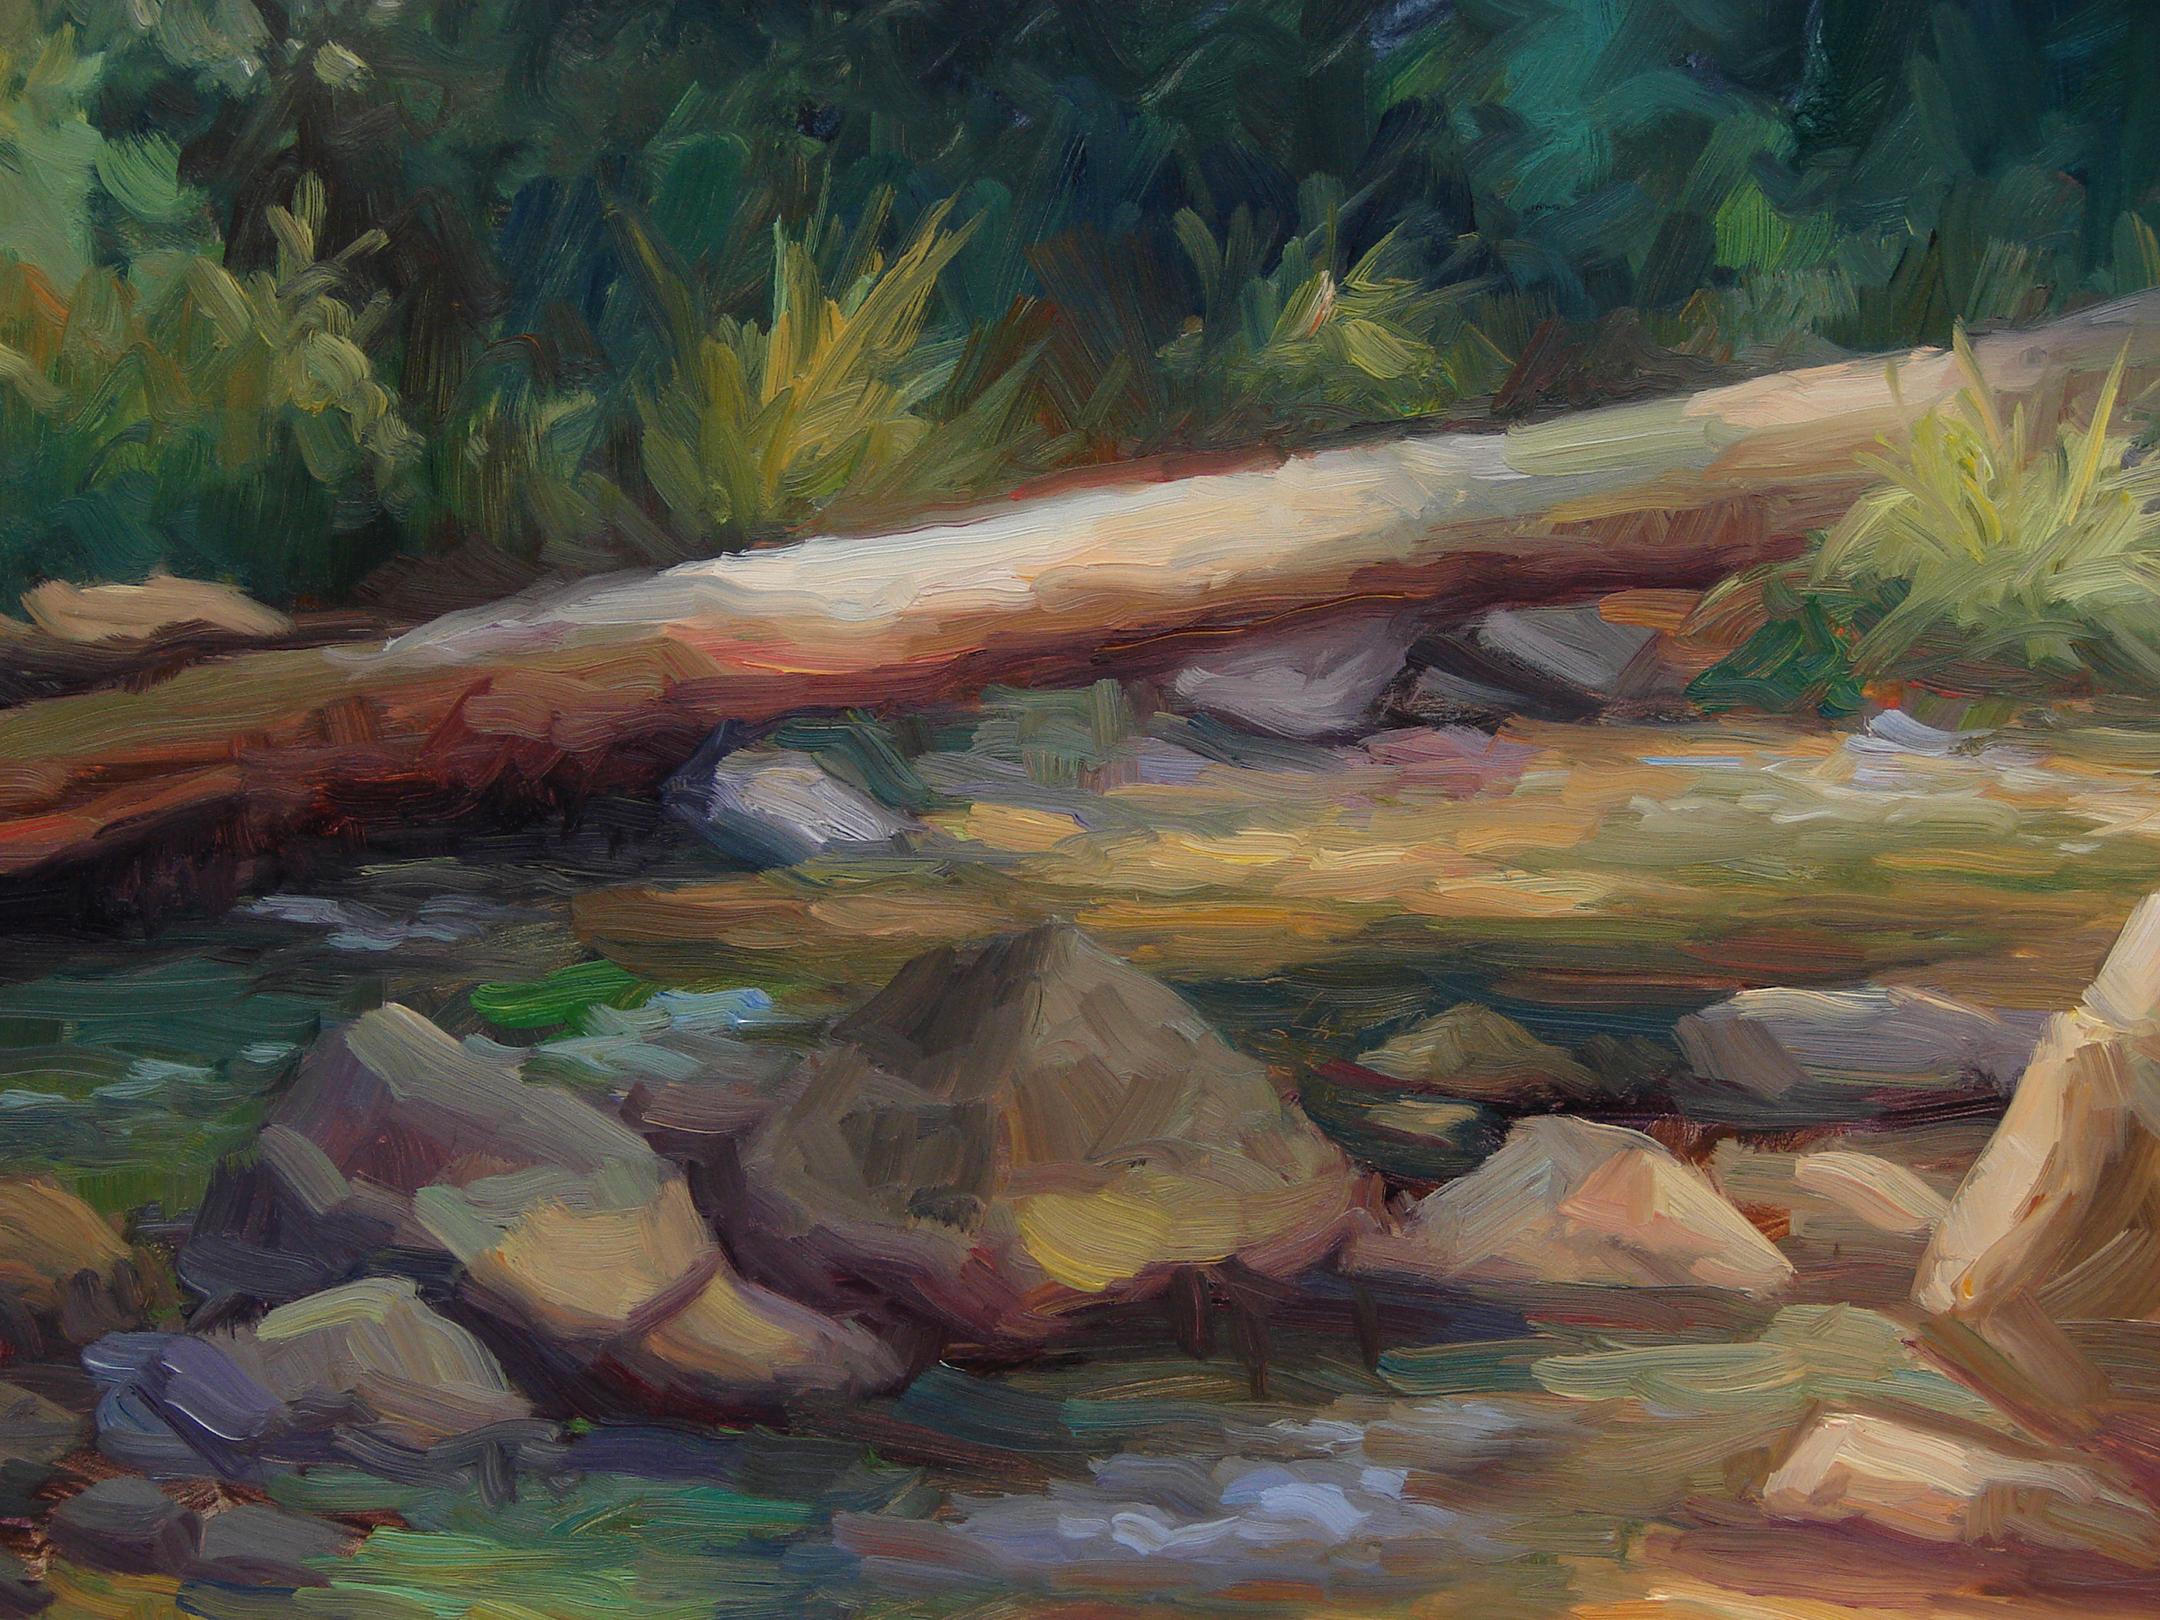 <p>Artist Comments<br /> I recently spent a day at Lower Canyon Creek in central Arizona where I did a plein air painting and I took lots of photos. I did this painting back in the studio from the photos plus the experience of having spent time